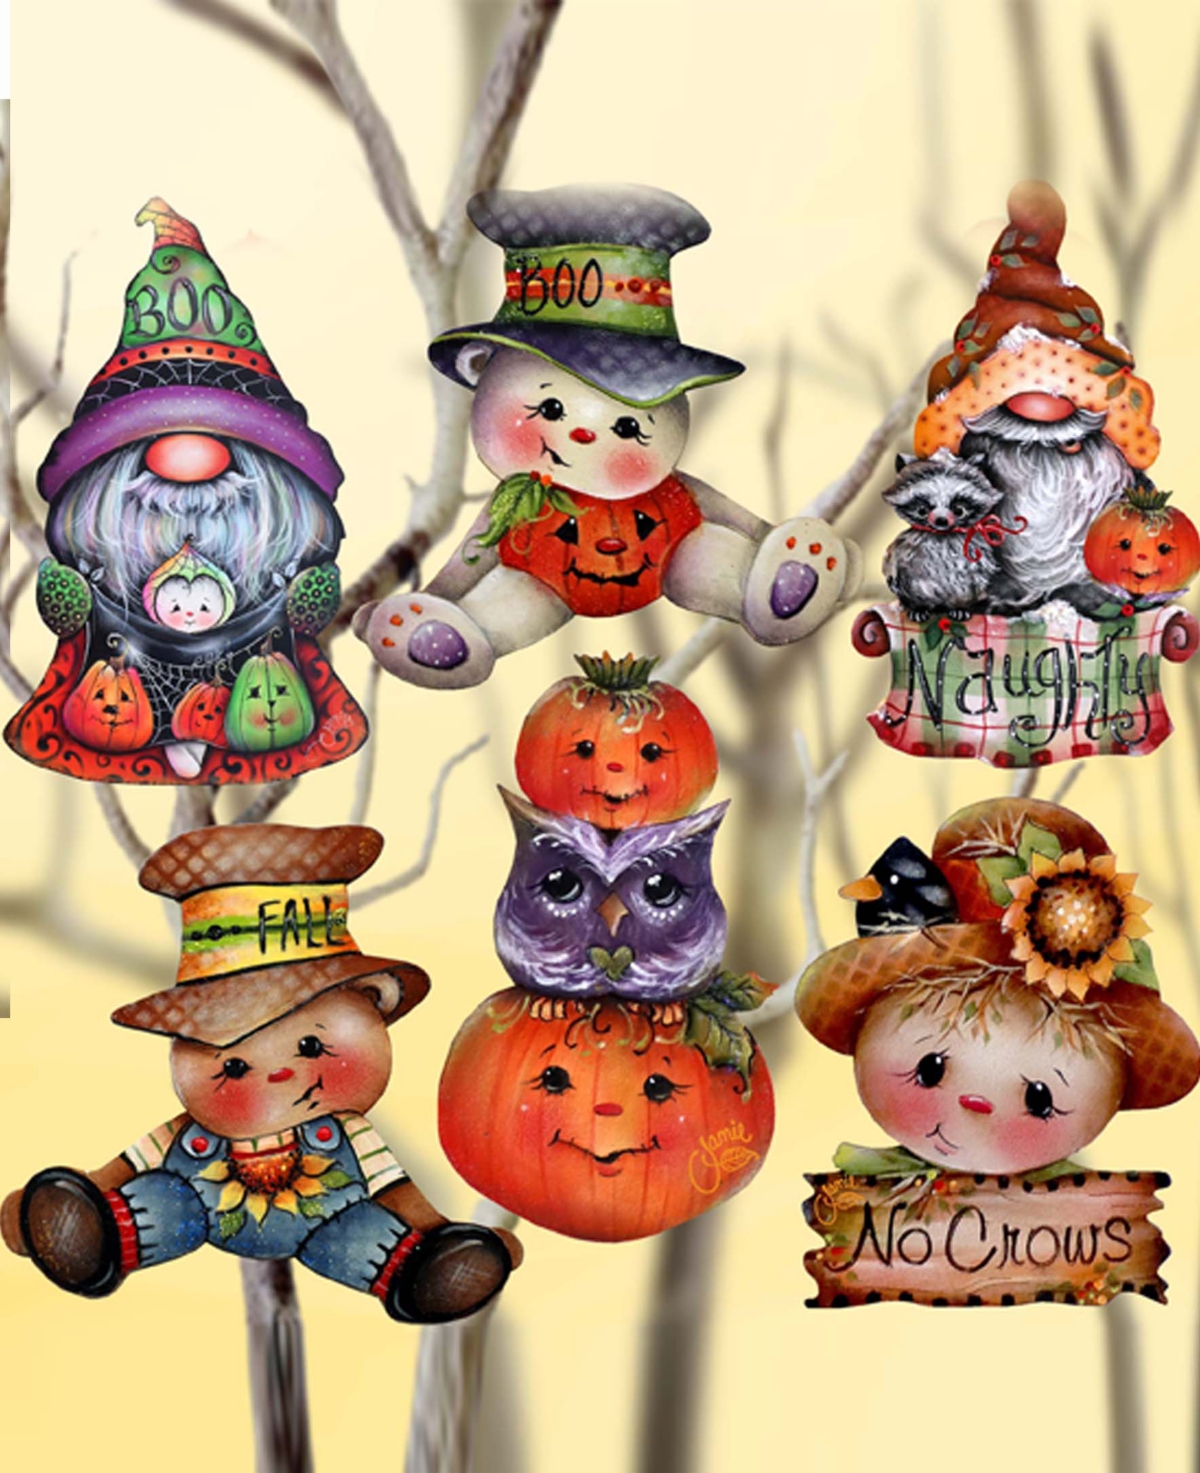 Designocracy Holiday Wooden Clip-on Ornaments Pumpkin, Scarecrow, Gnome Set Of 6 J. Mills-price In Multi Color